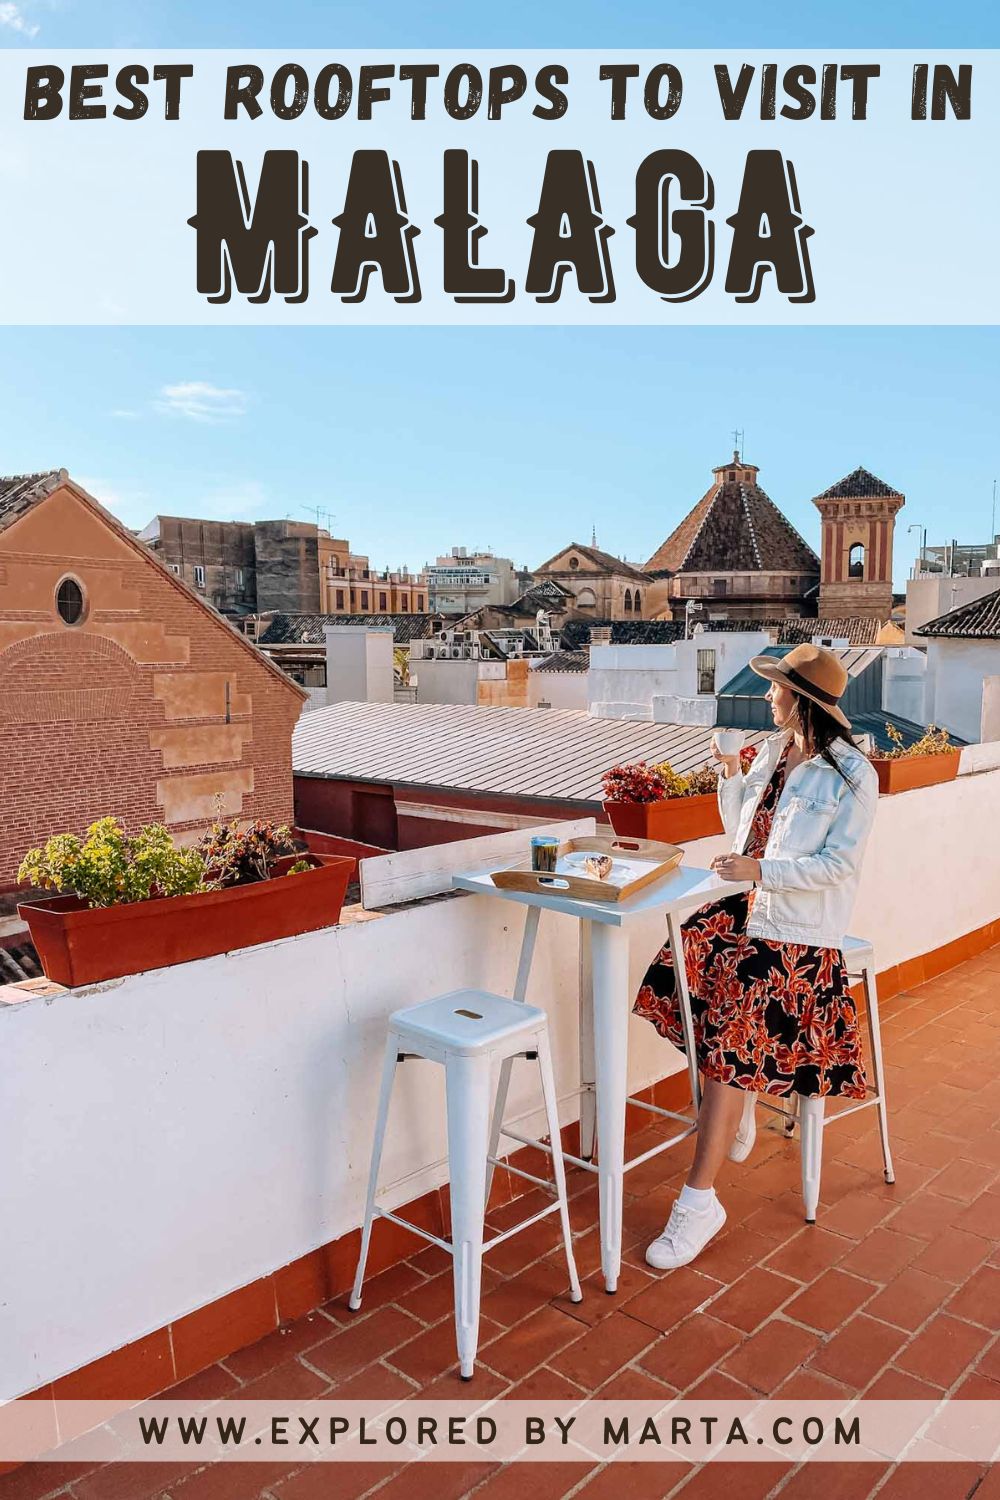 Amazing rooftop terraces to visit in Malaga